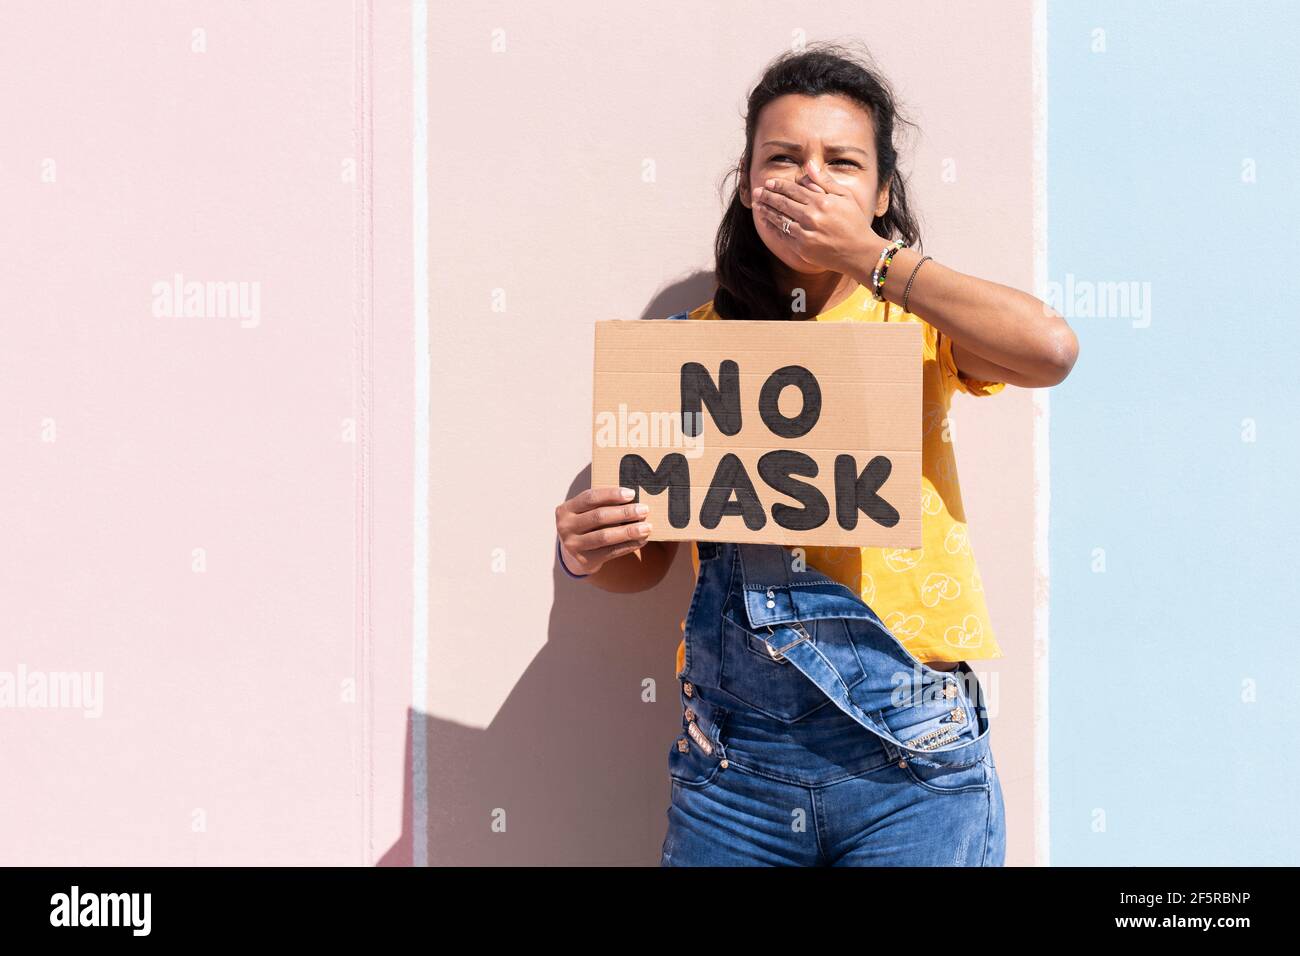 Portrait of hispanic woman holding a banner with the text No Mask while covering her mouth with her hand. She is standing next to a colorful wall. Spa Stock Photo